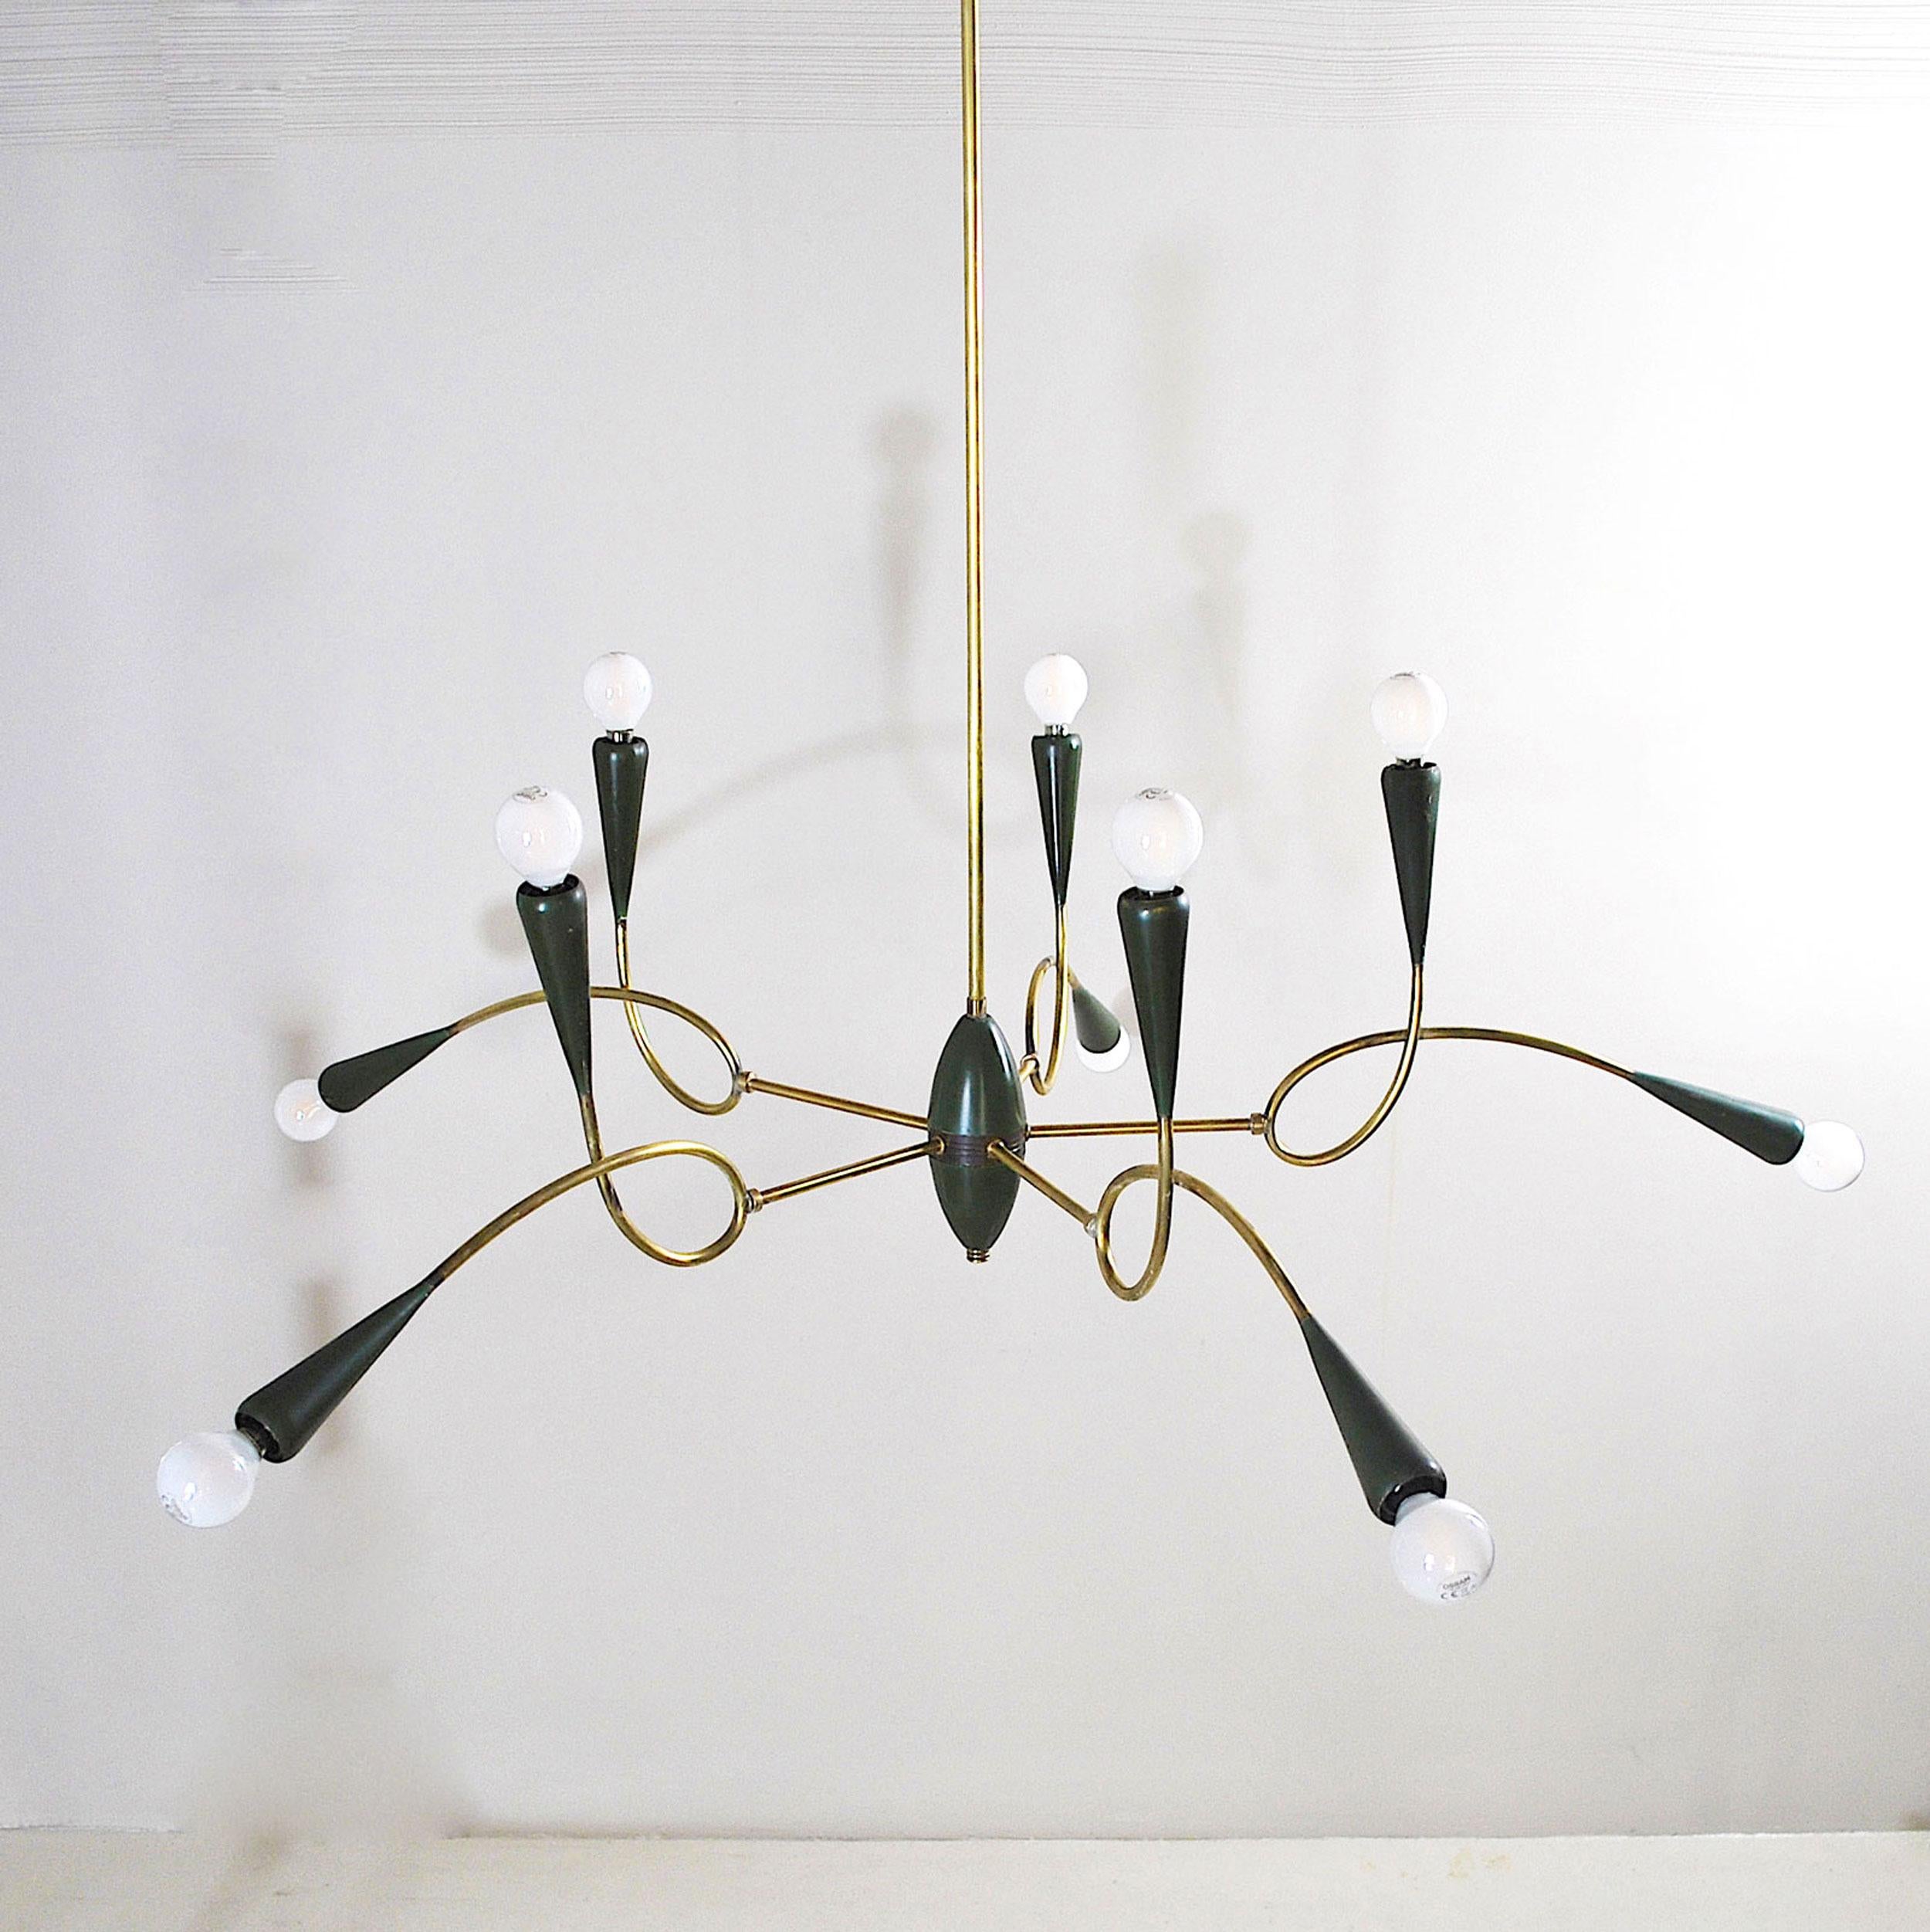 Italian midcentury chandelier in brass and aluminum from 1950s, preserved in an optimal manner with its original lacquerin.